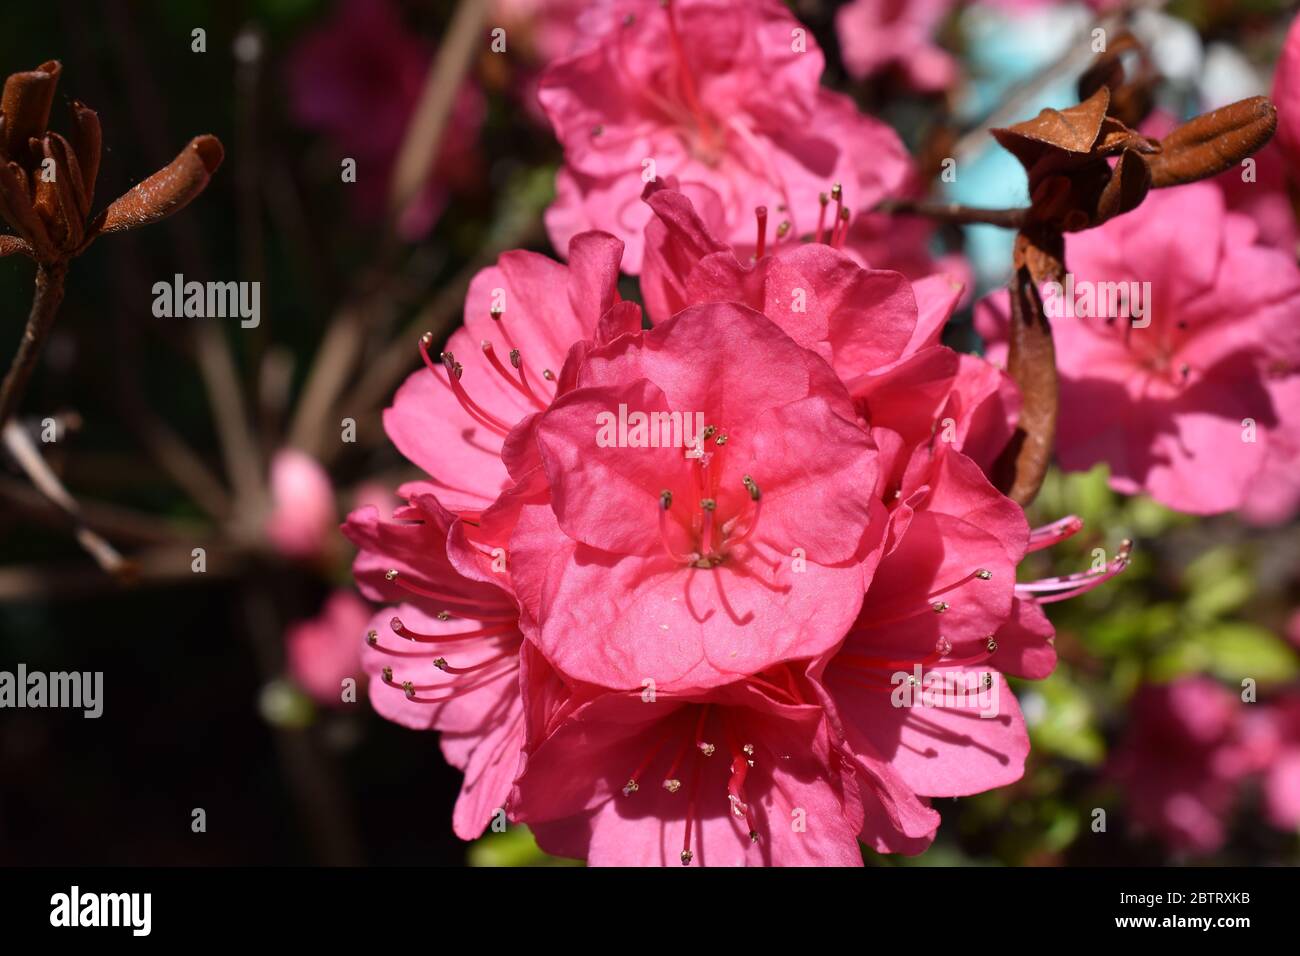 Bright pink azalea flowers with soft focus in a narrow depth of field Stock Photo